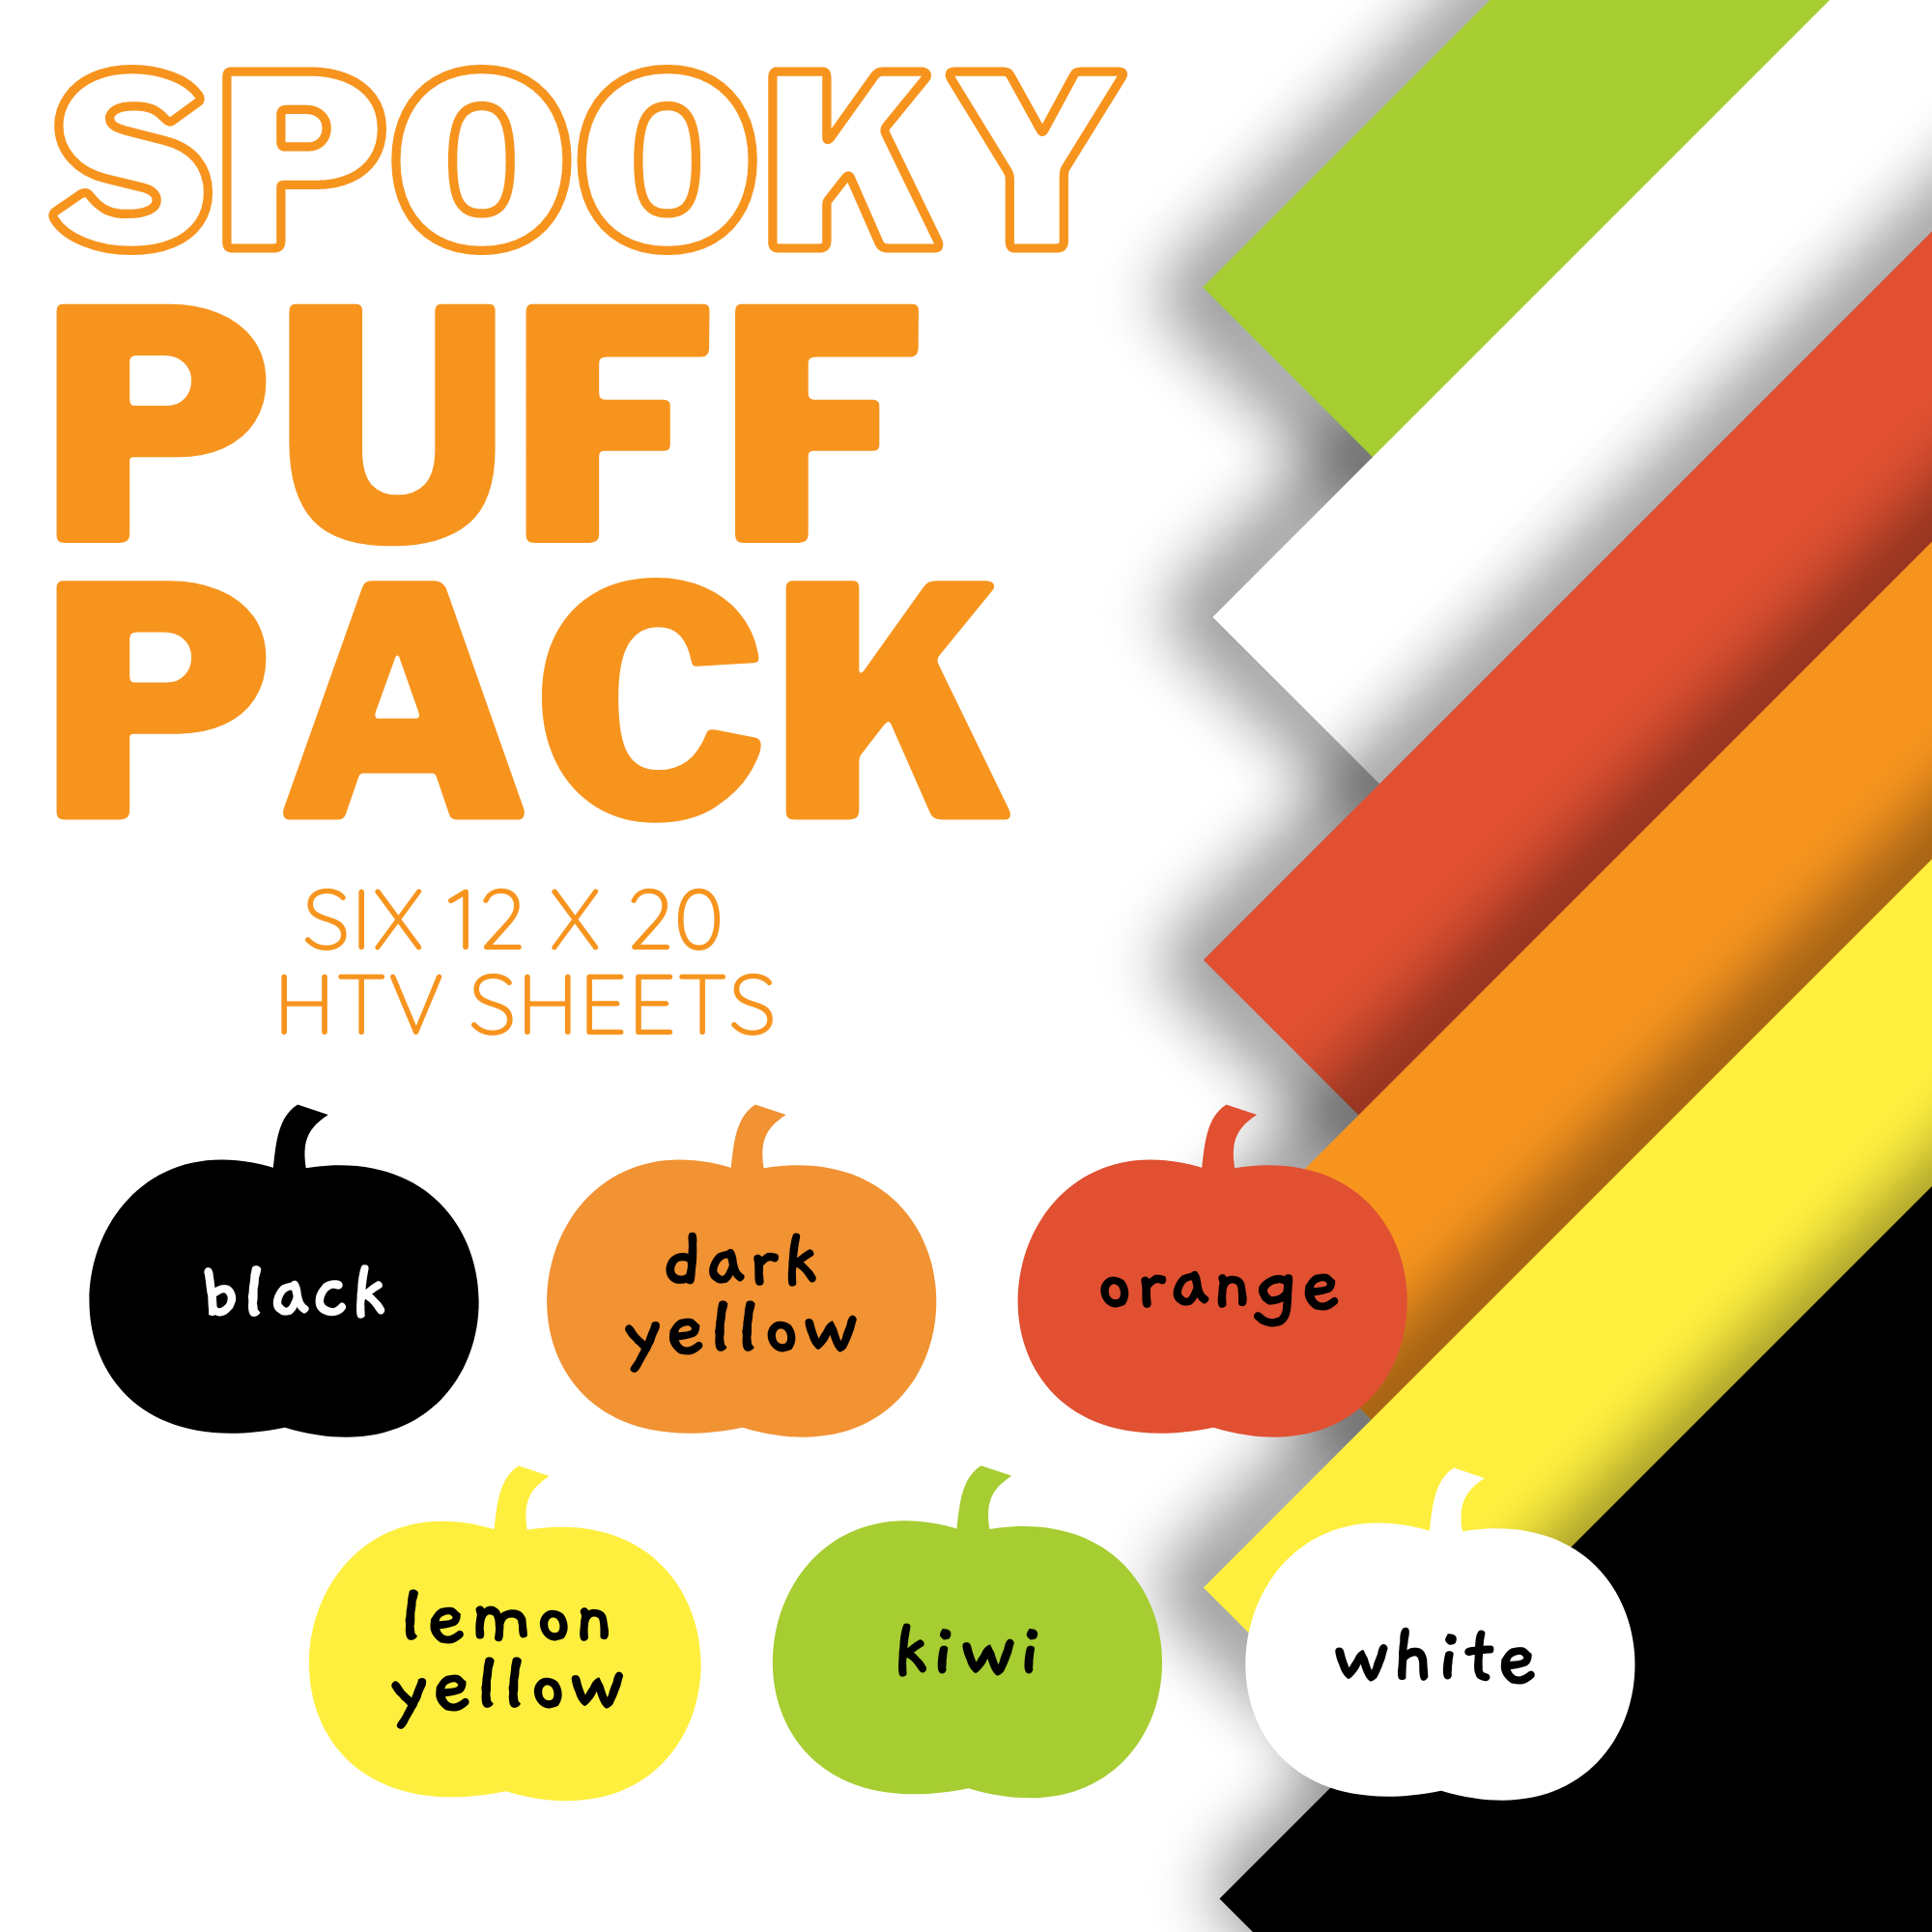 "Spooky" Puff 3D HTV Pack